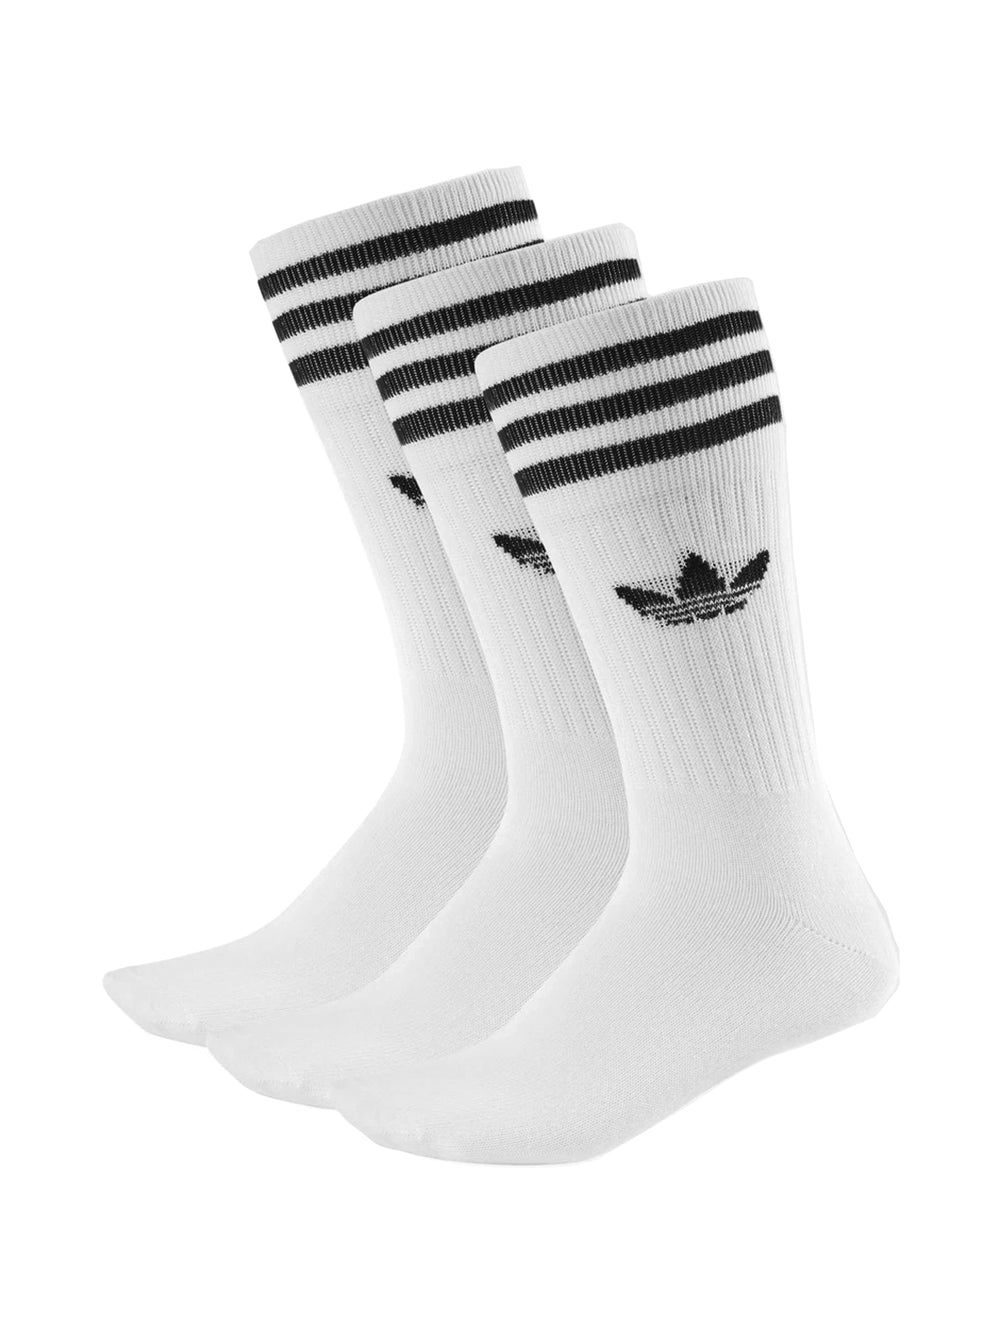 ADIDAS SOLID CREW 3 PACK SOCKS   - CLEARANCE